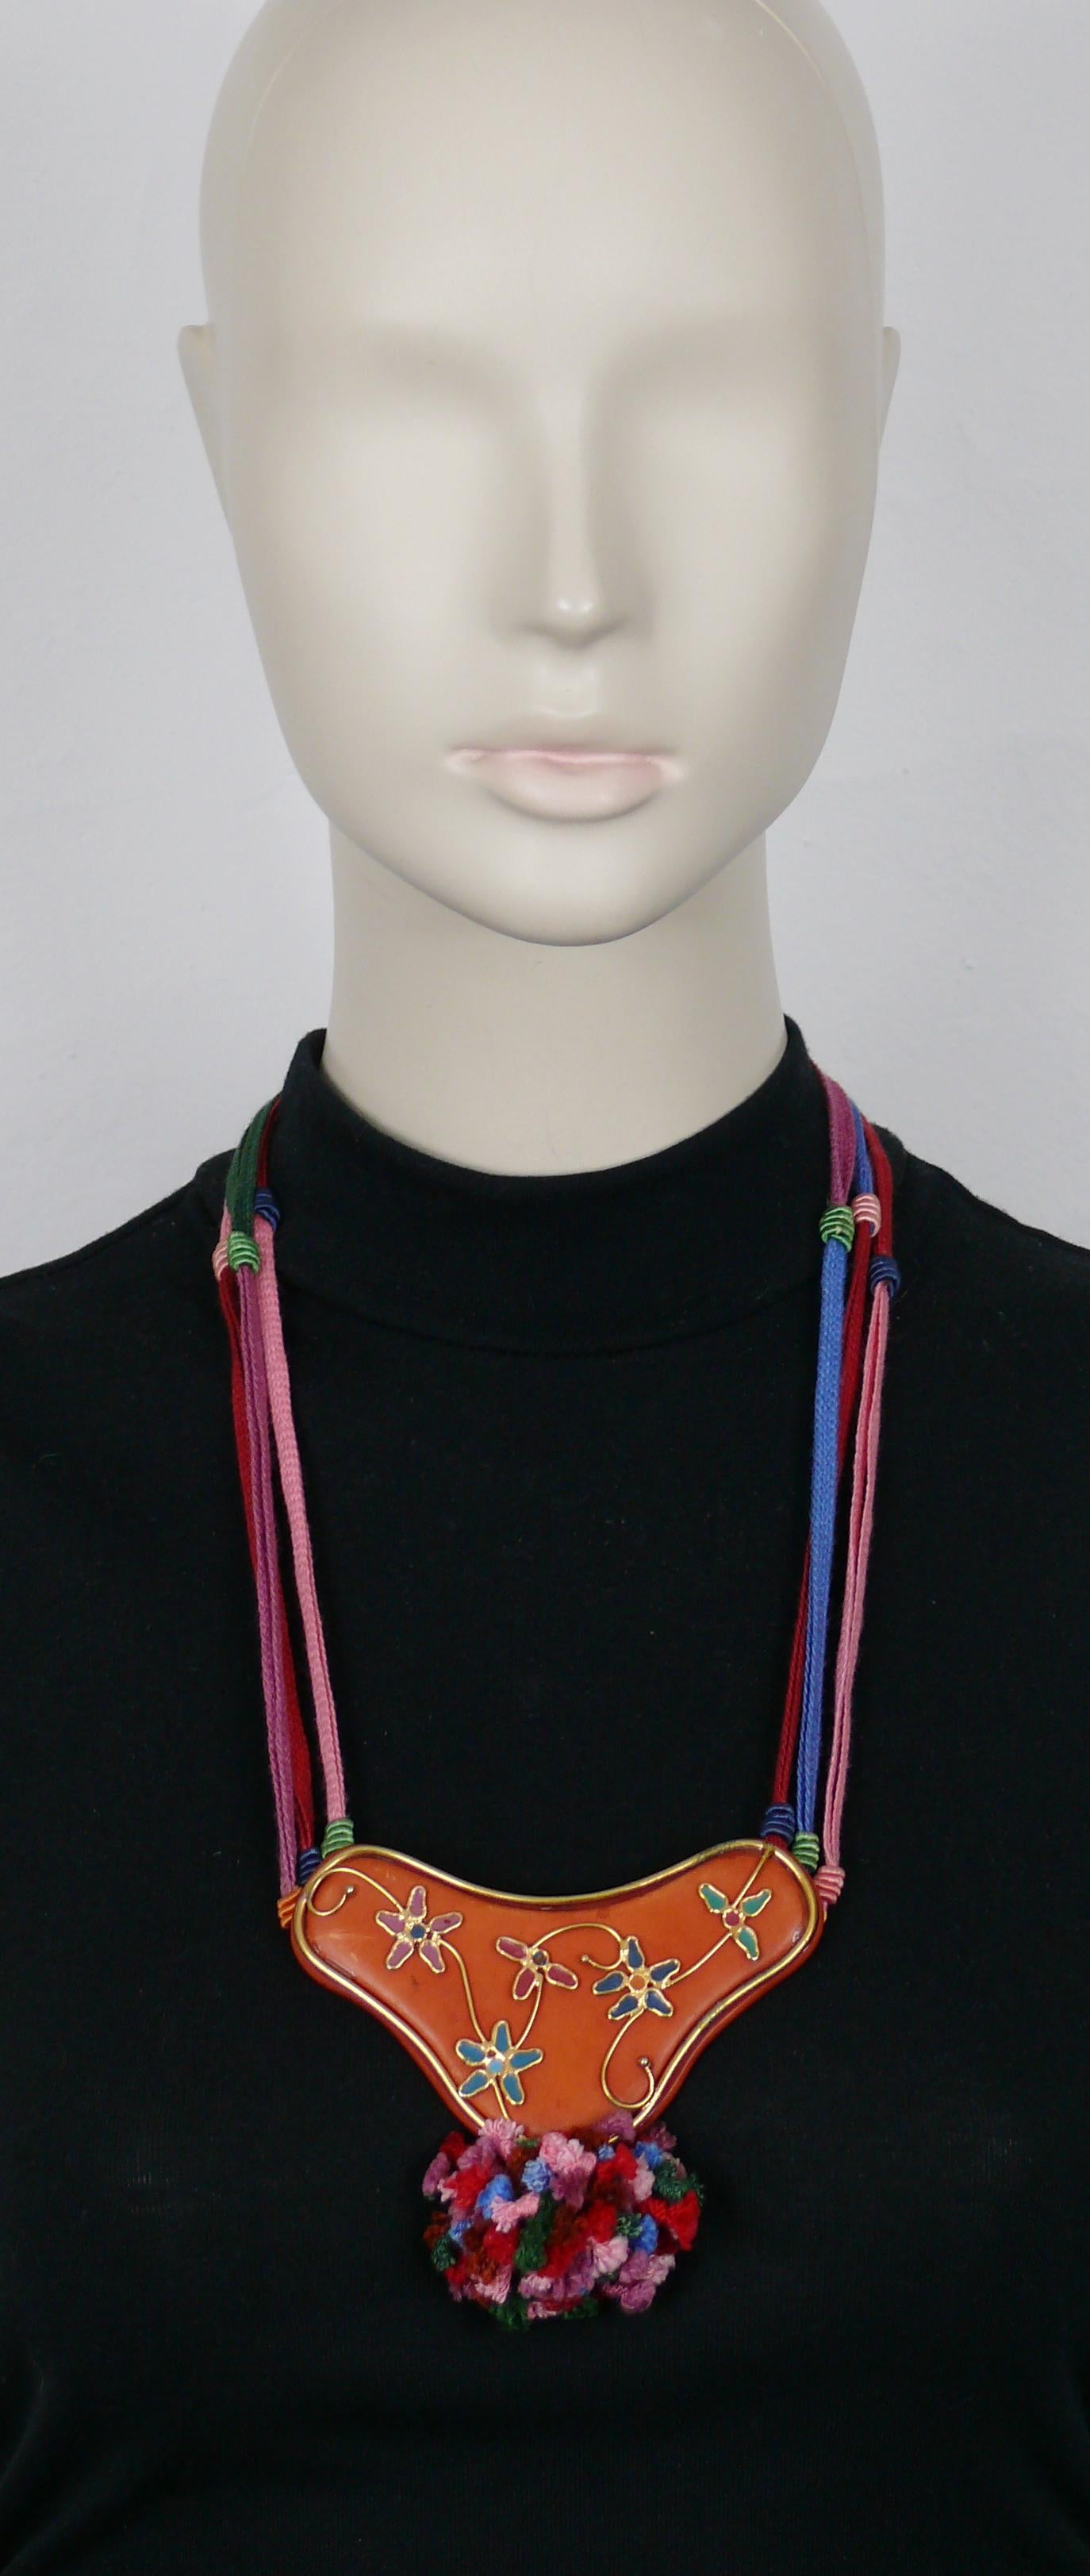 EMANUEL UNGARO vintage multicolored shoelaces necklace featuring an orange resin centrepiece with flowers and a tassel.

Embossed EMANUEL UNGARO Parralèle - Paris.
Made in Italy.

Indicative measurements : length worn approx. 32.5 cm (12.80